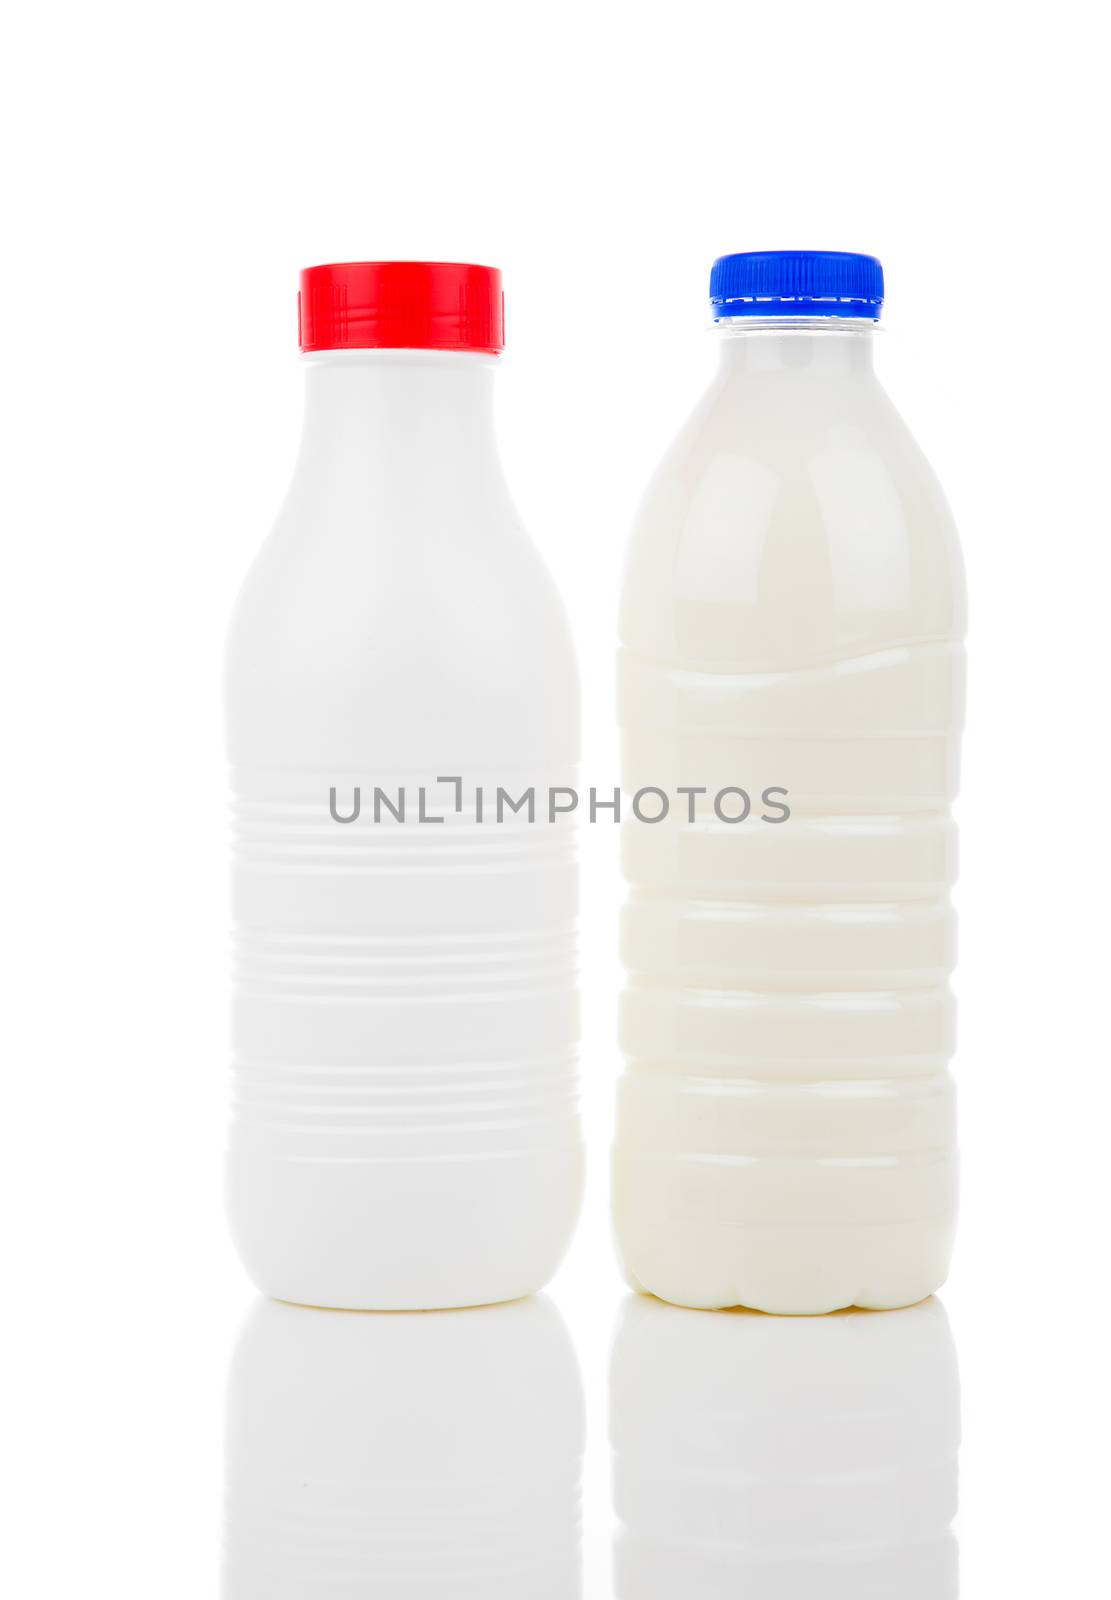 two bottles of milk isolated on white background